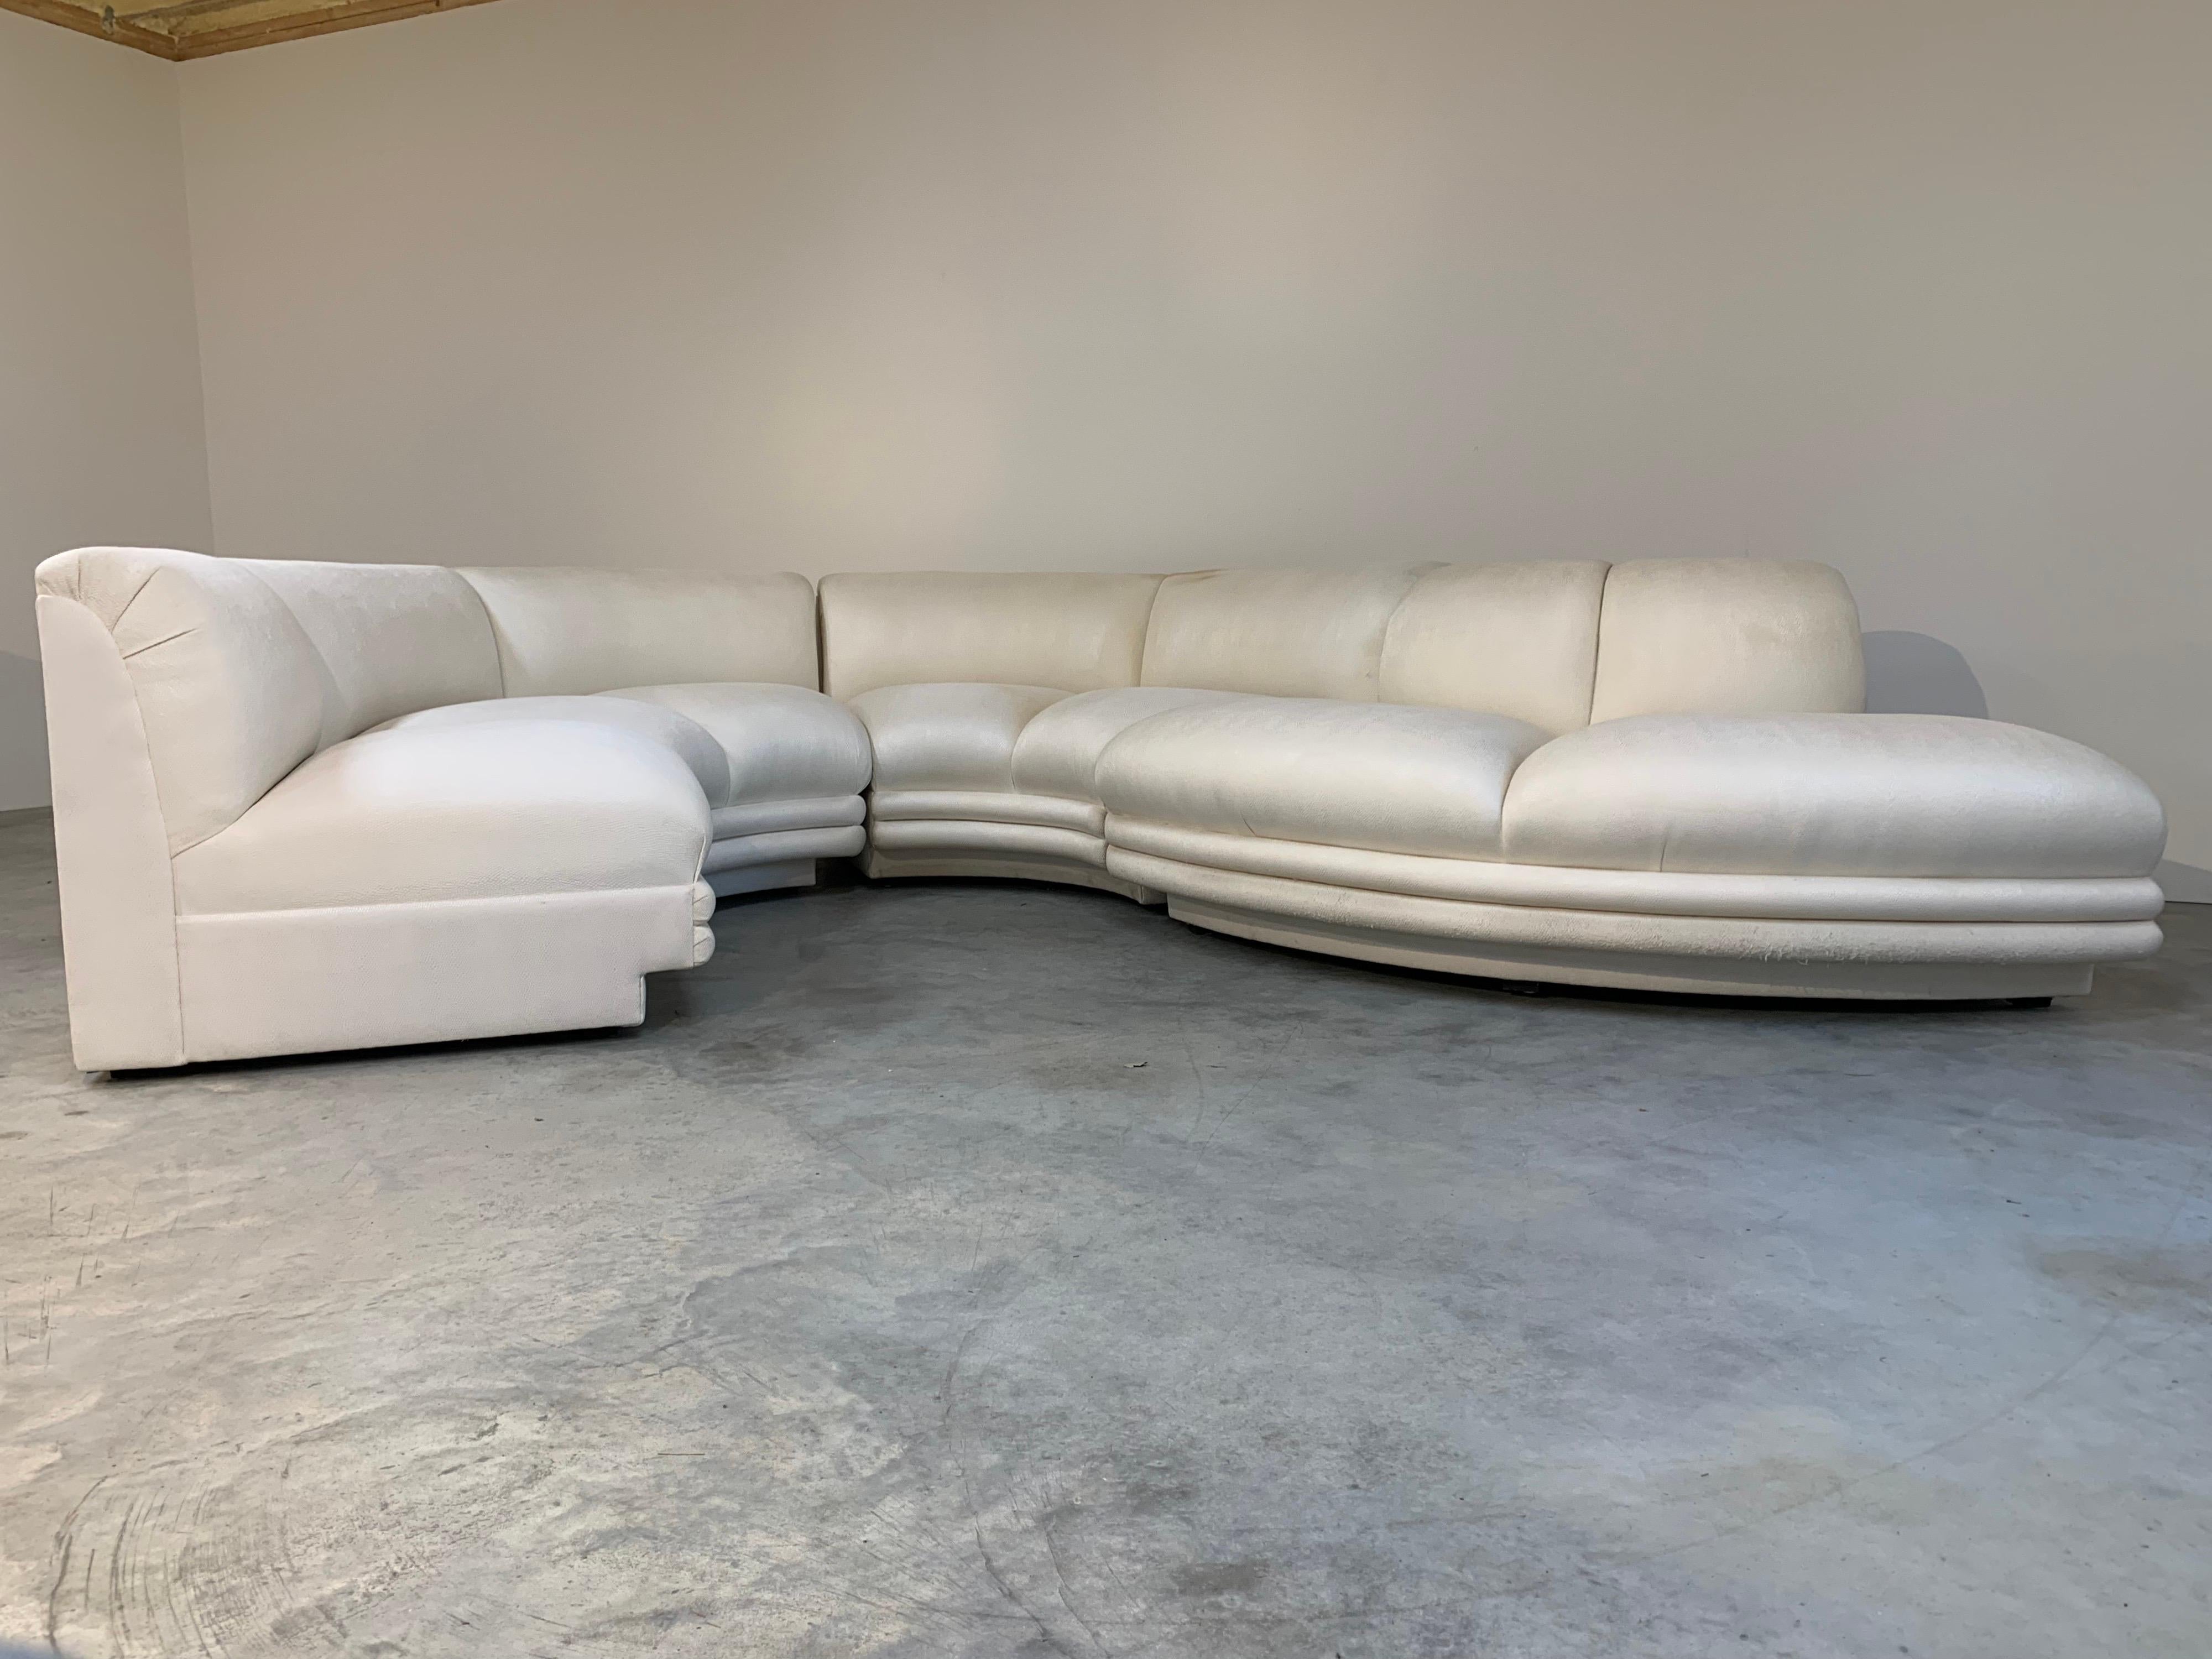 4 piece serpentine sectional sofa attributed to Weiman Preview circa 1980. Outstanding lines and construction. Upholstery is needed and there is a large water stain on the backrest as shown in image provided. 
Measurements: 
2 identical sections